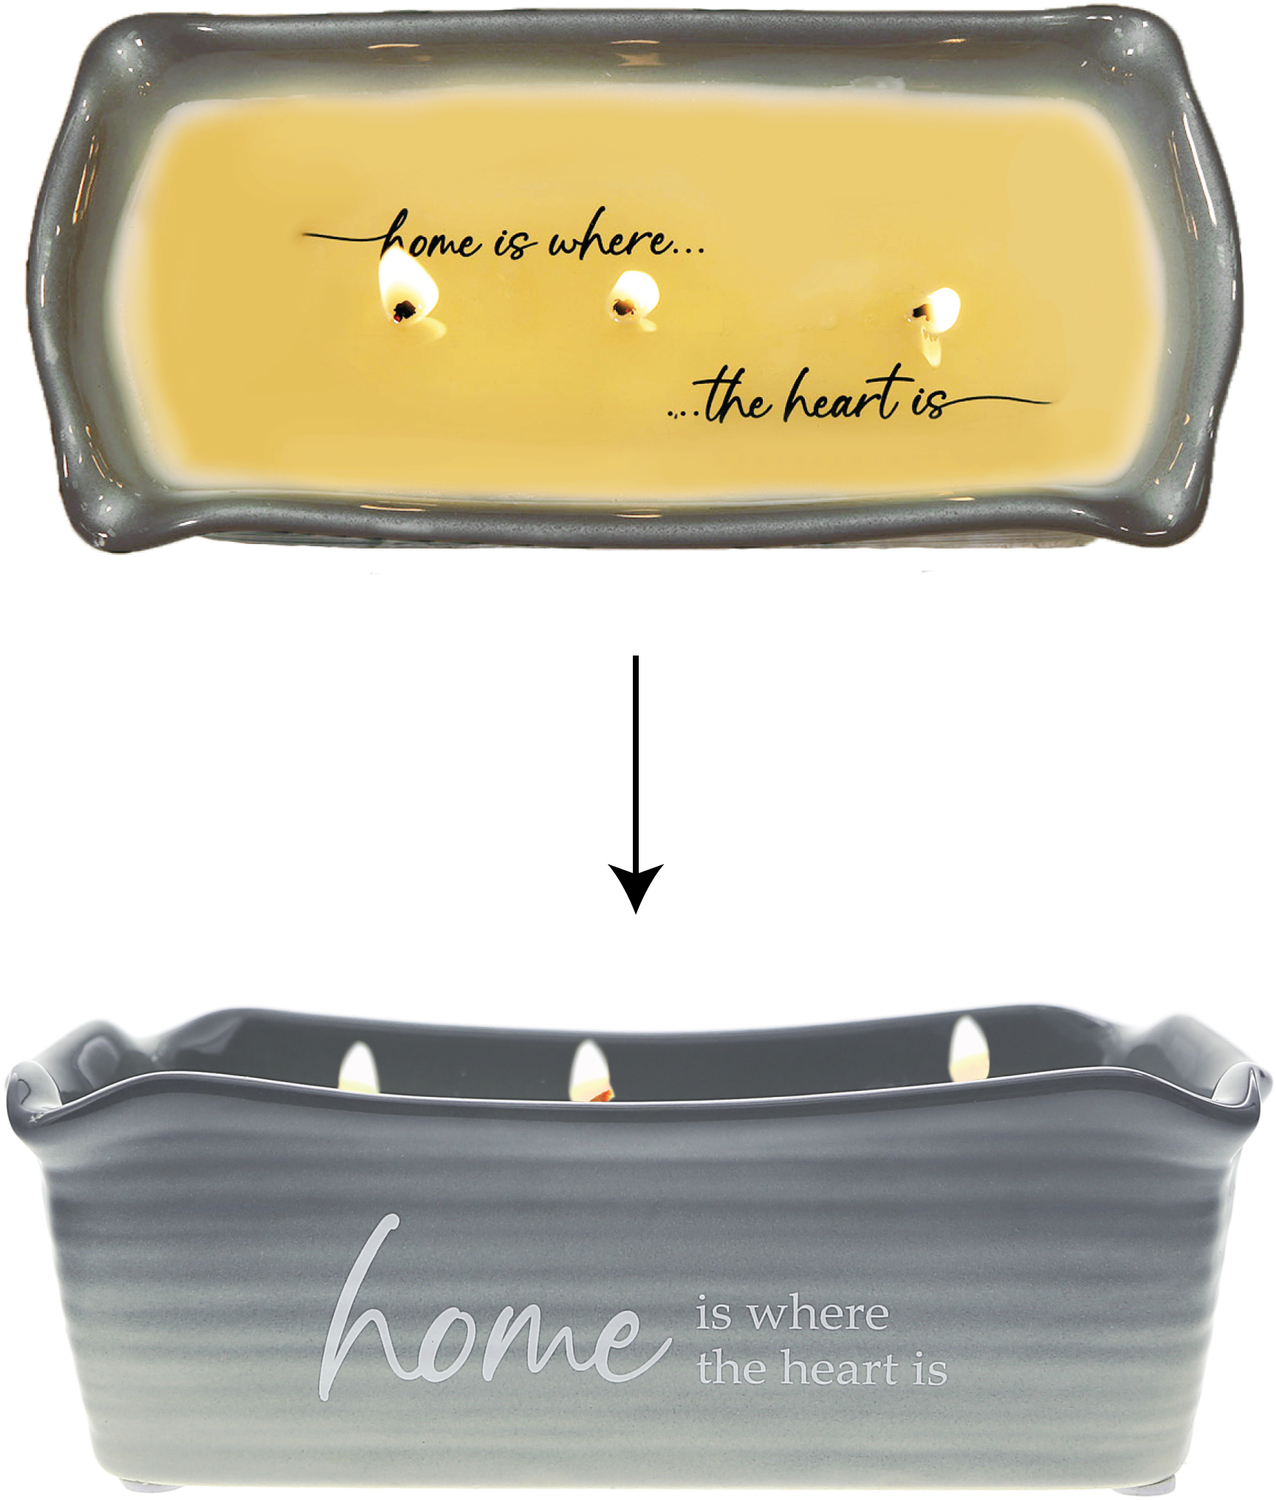 Home by Thoughts of Home - Home - 12 oz - 100% Soy Wax Reveal Triple Wick Candle
Scent: Tranquility